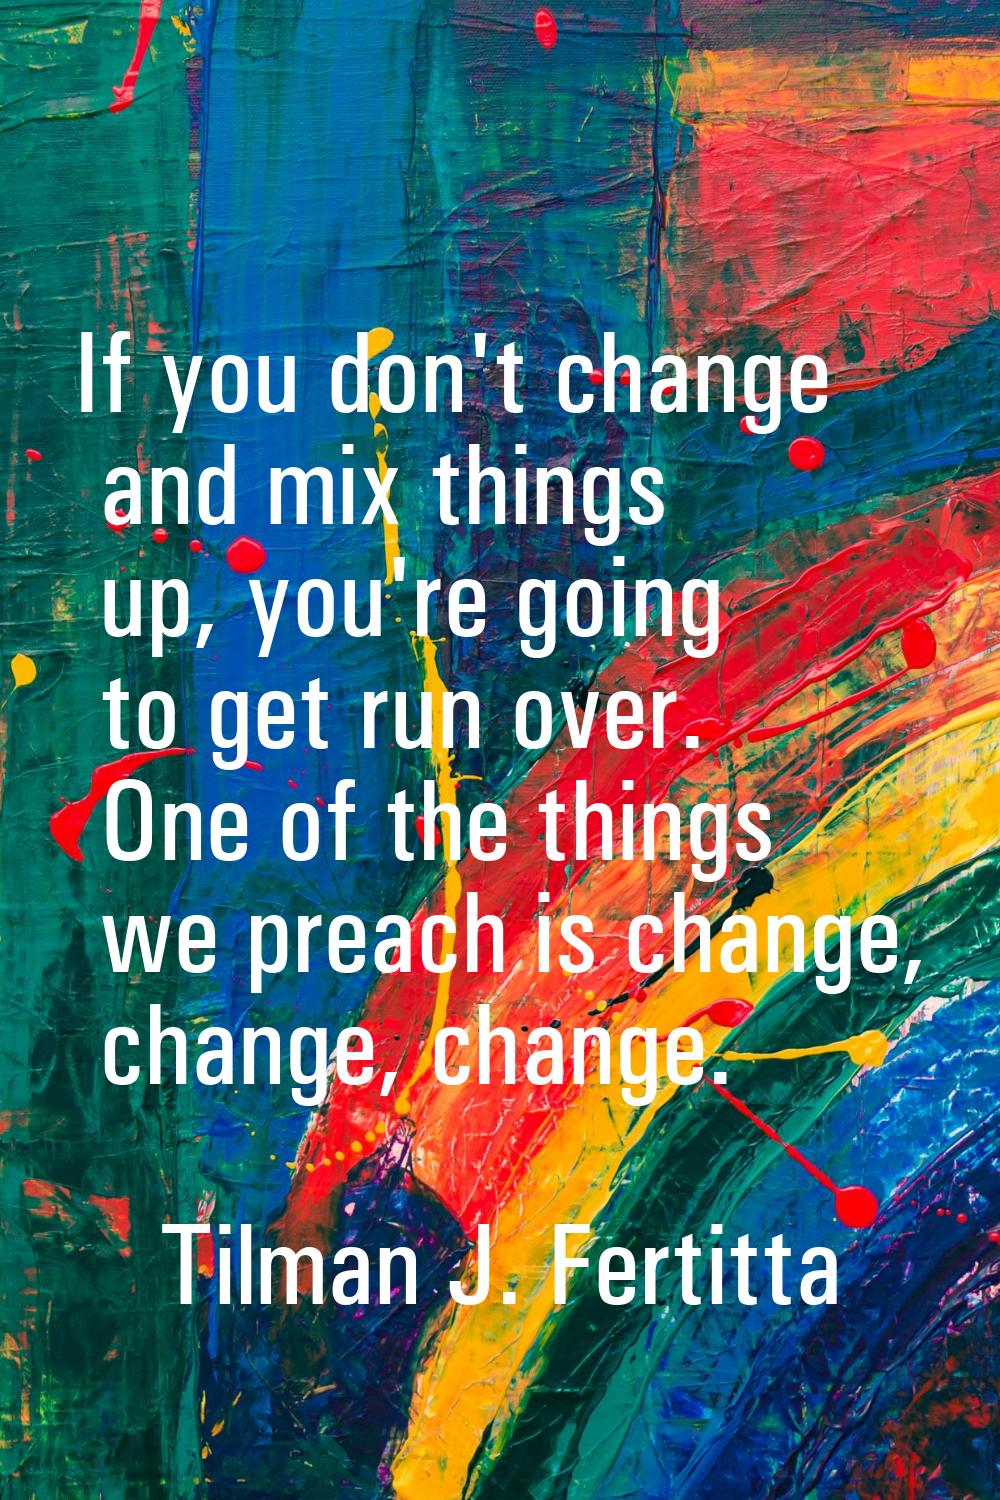 If you don't change and mix things up, you're going to get run over. One of the things we preach is